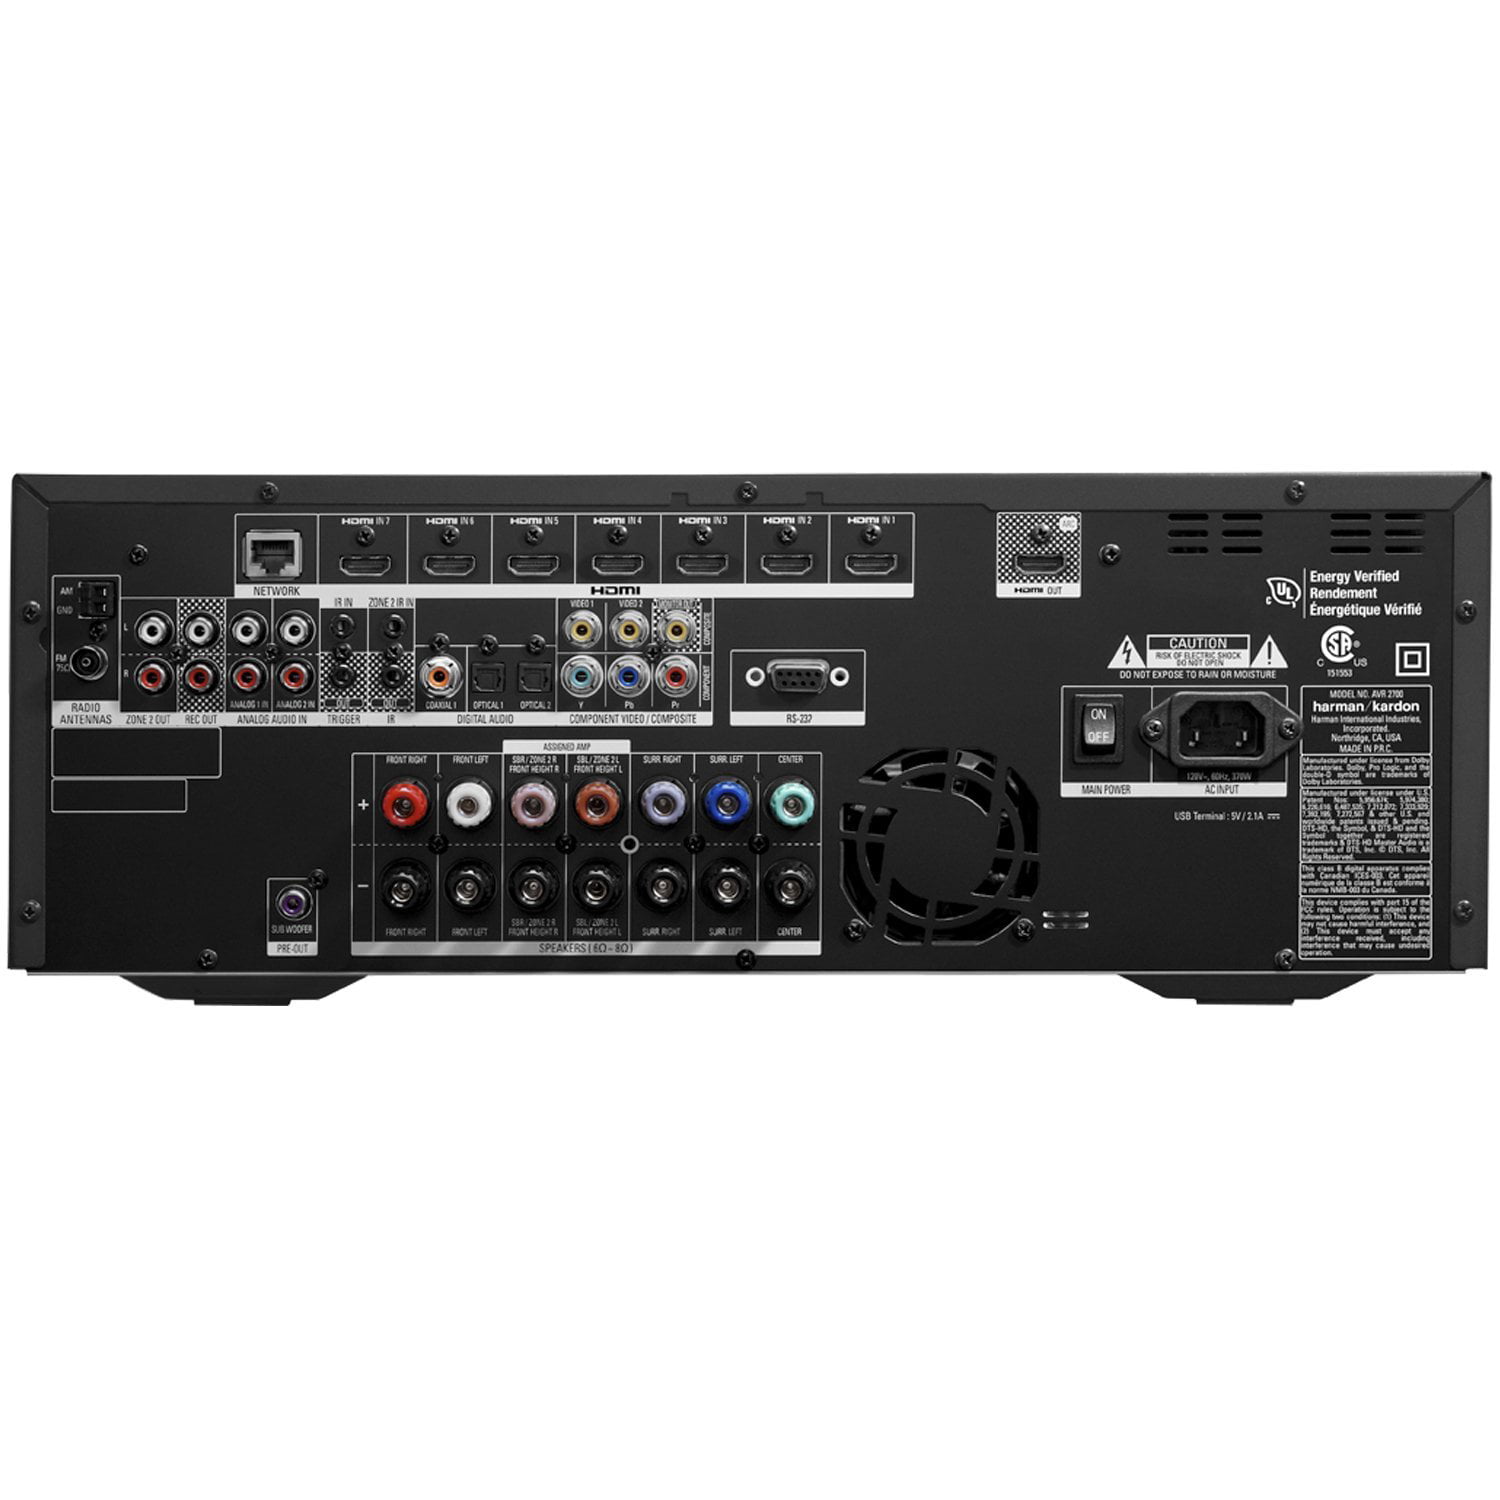 Harman Kardon 3700 2-Channel Stereo Receiver with Network Connectivity Renewed 